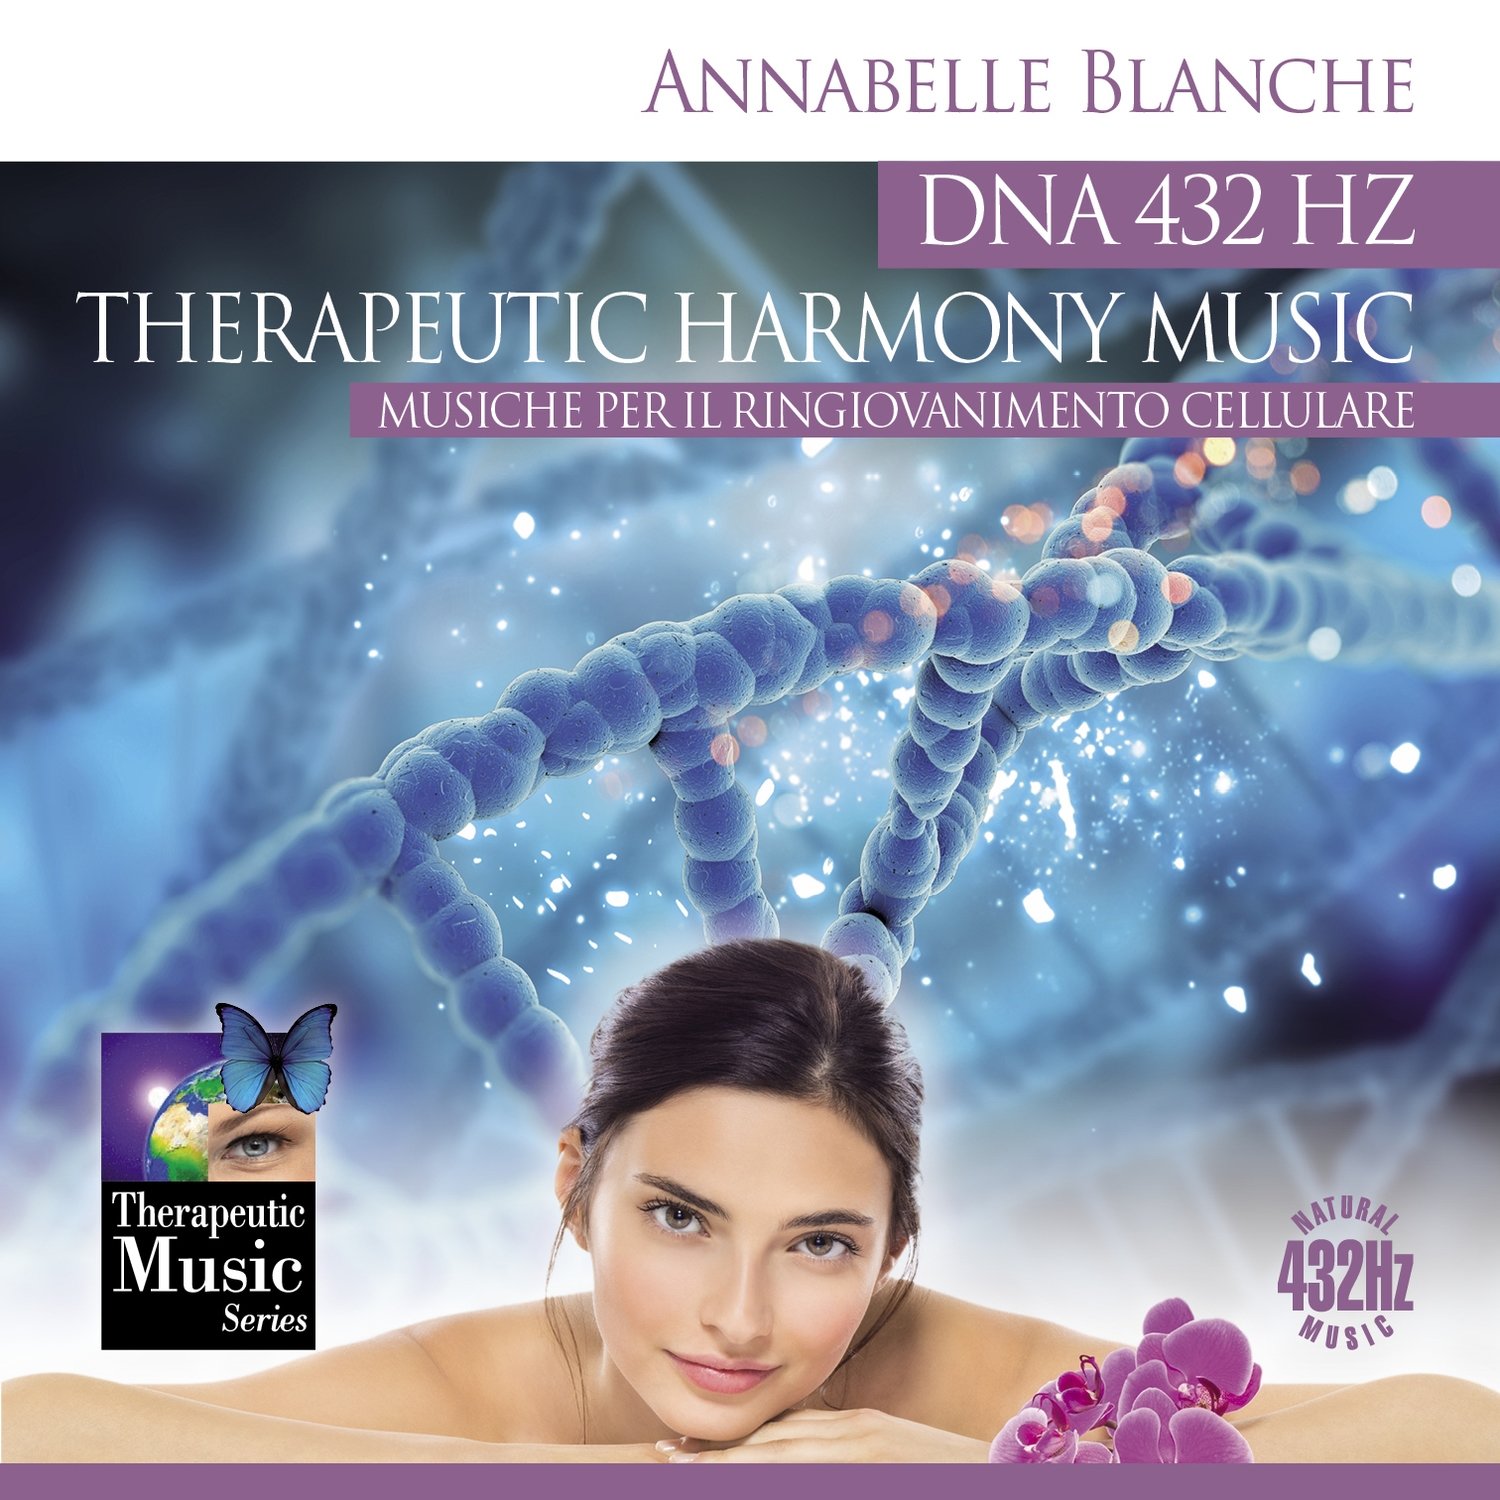 Dna 432 Hz - Therapeutic Harmony Music - Annabelle Blanche